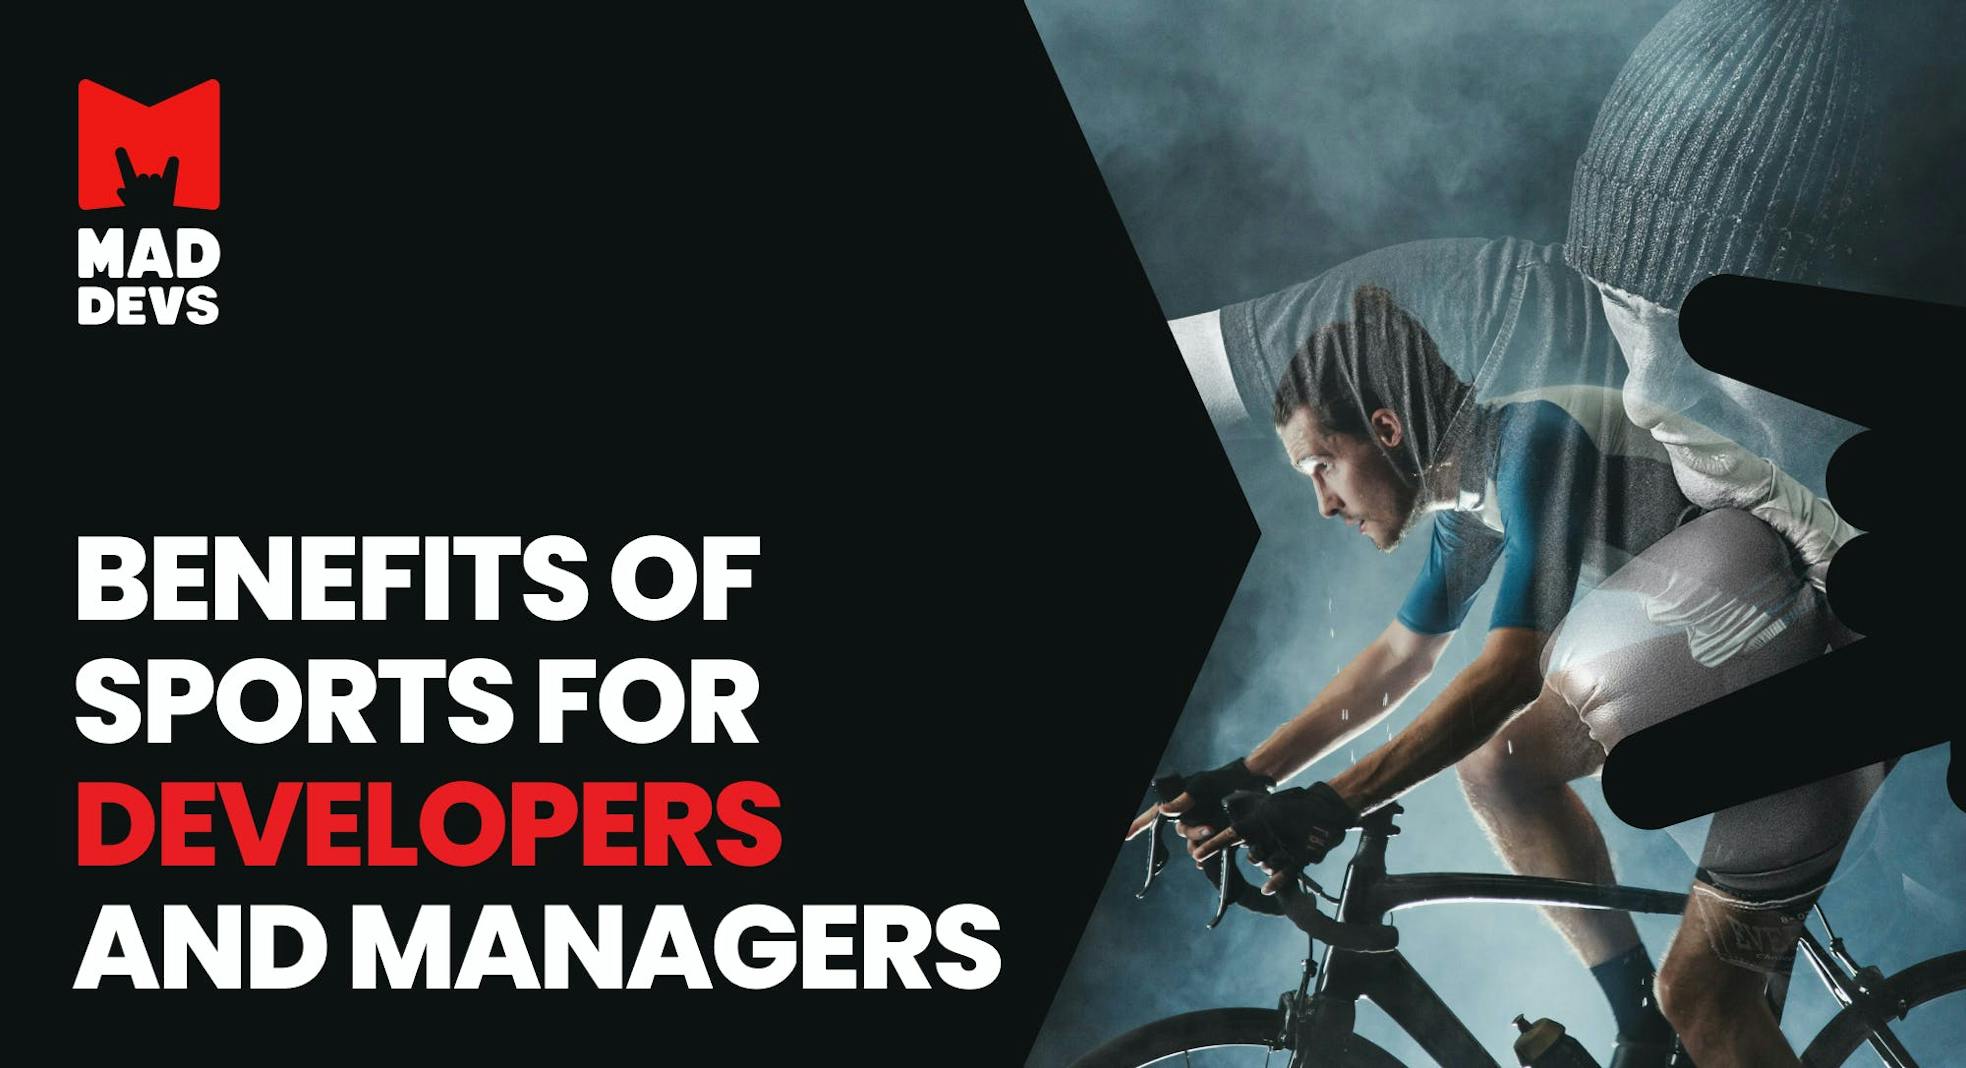 Benefits of Cycling and Martial Arts for a Software Engineer or Manager